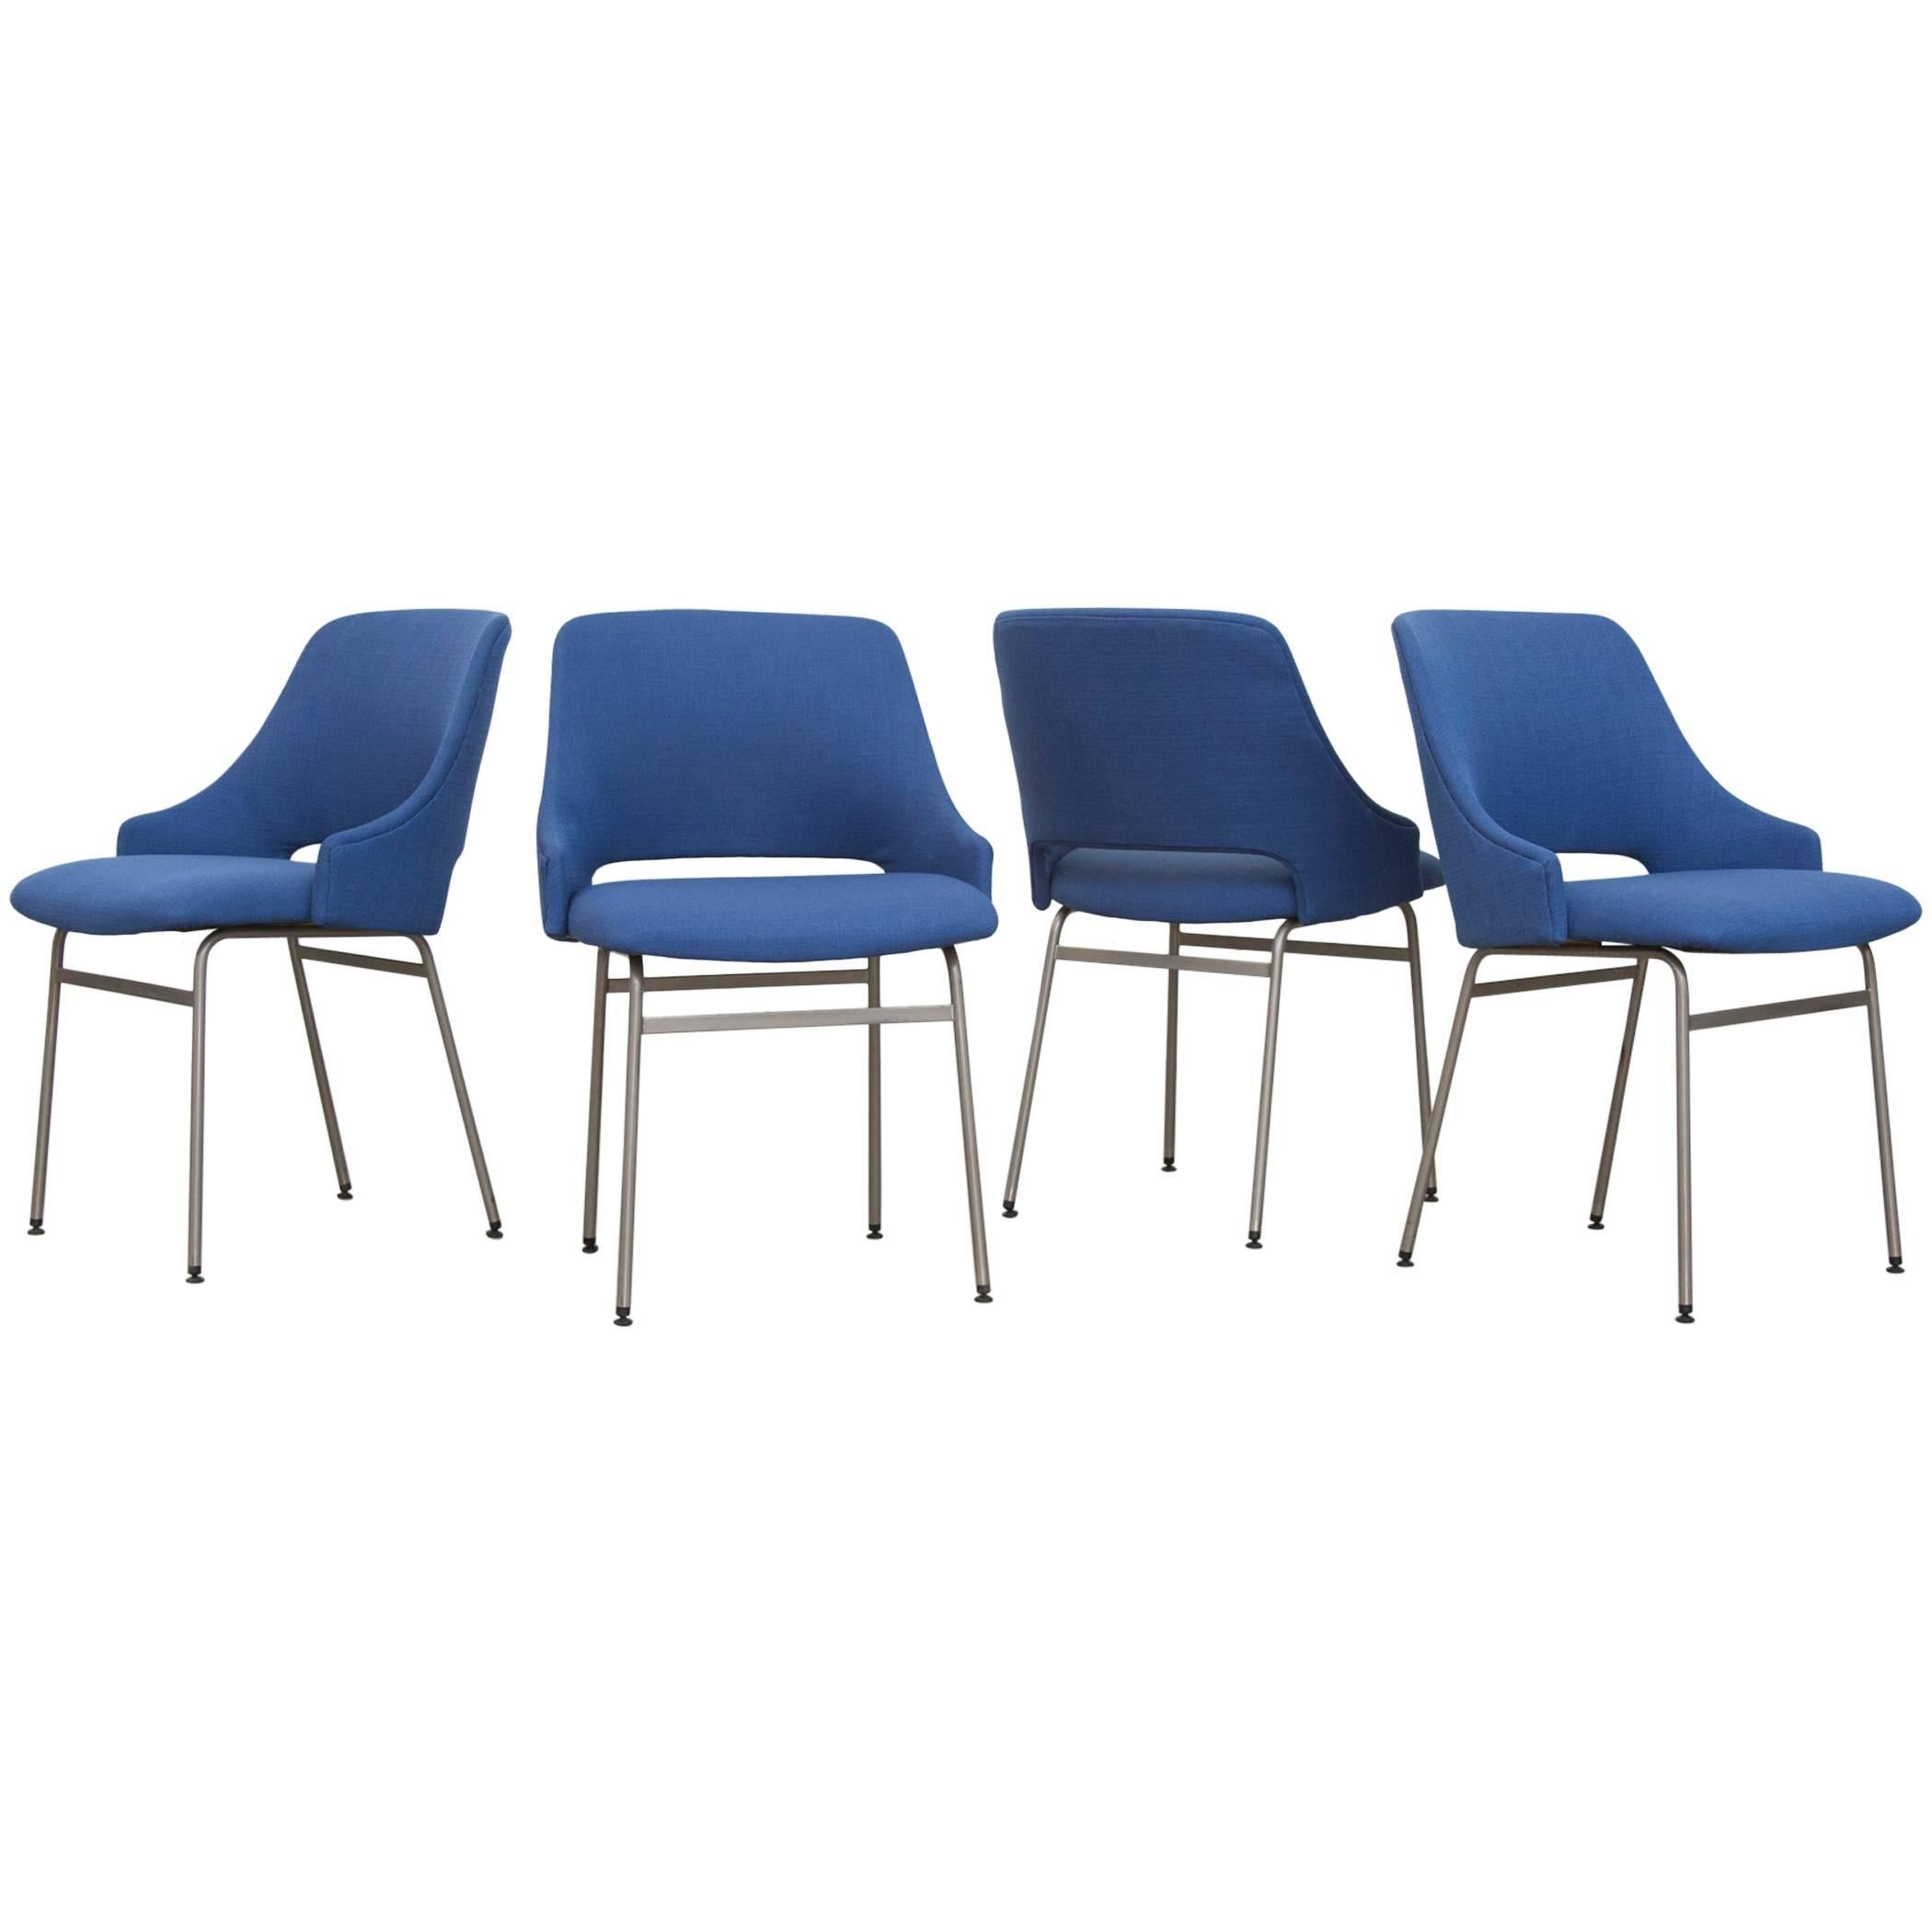 Set of Four Pastoe FM 32 Chairs in Royal Blue